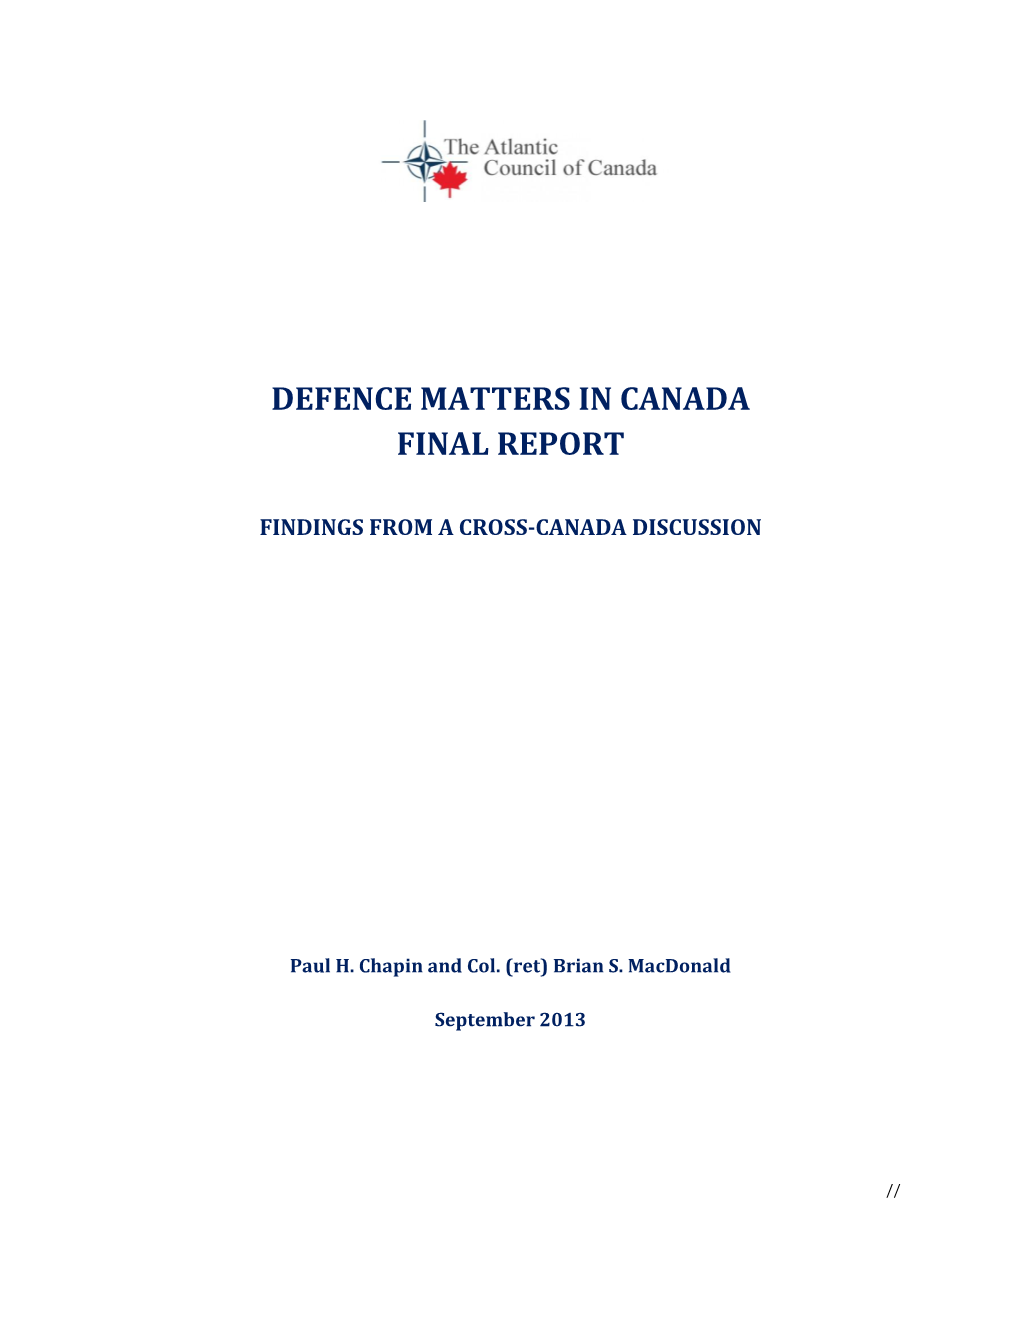 Defence Matters in Canada Final Report